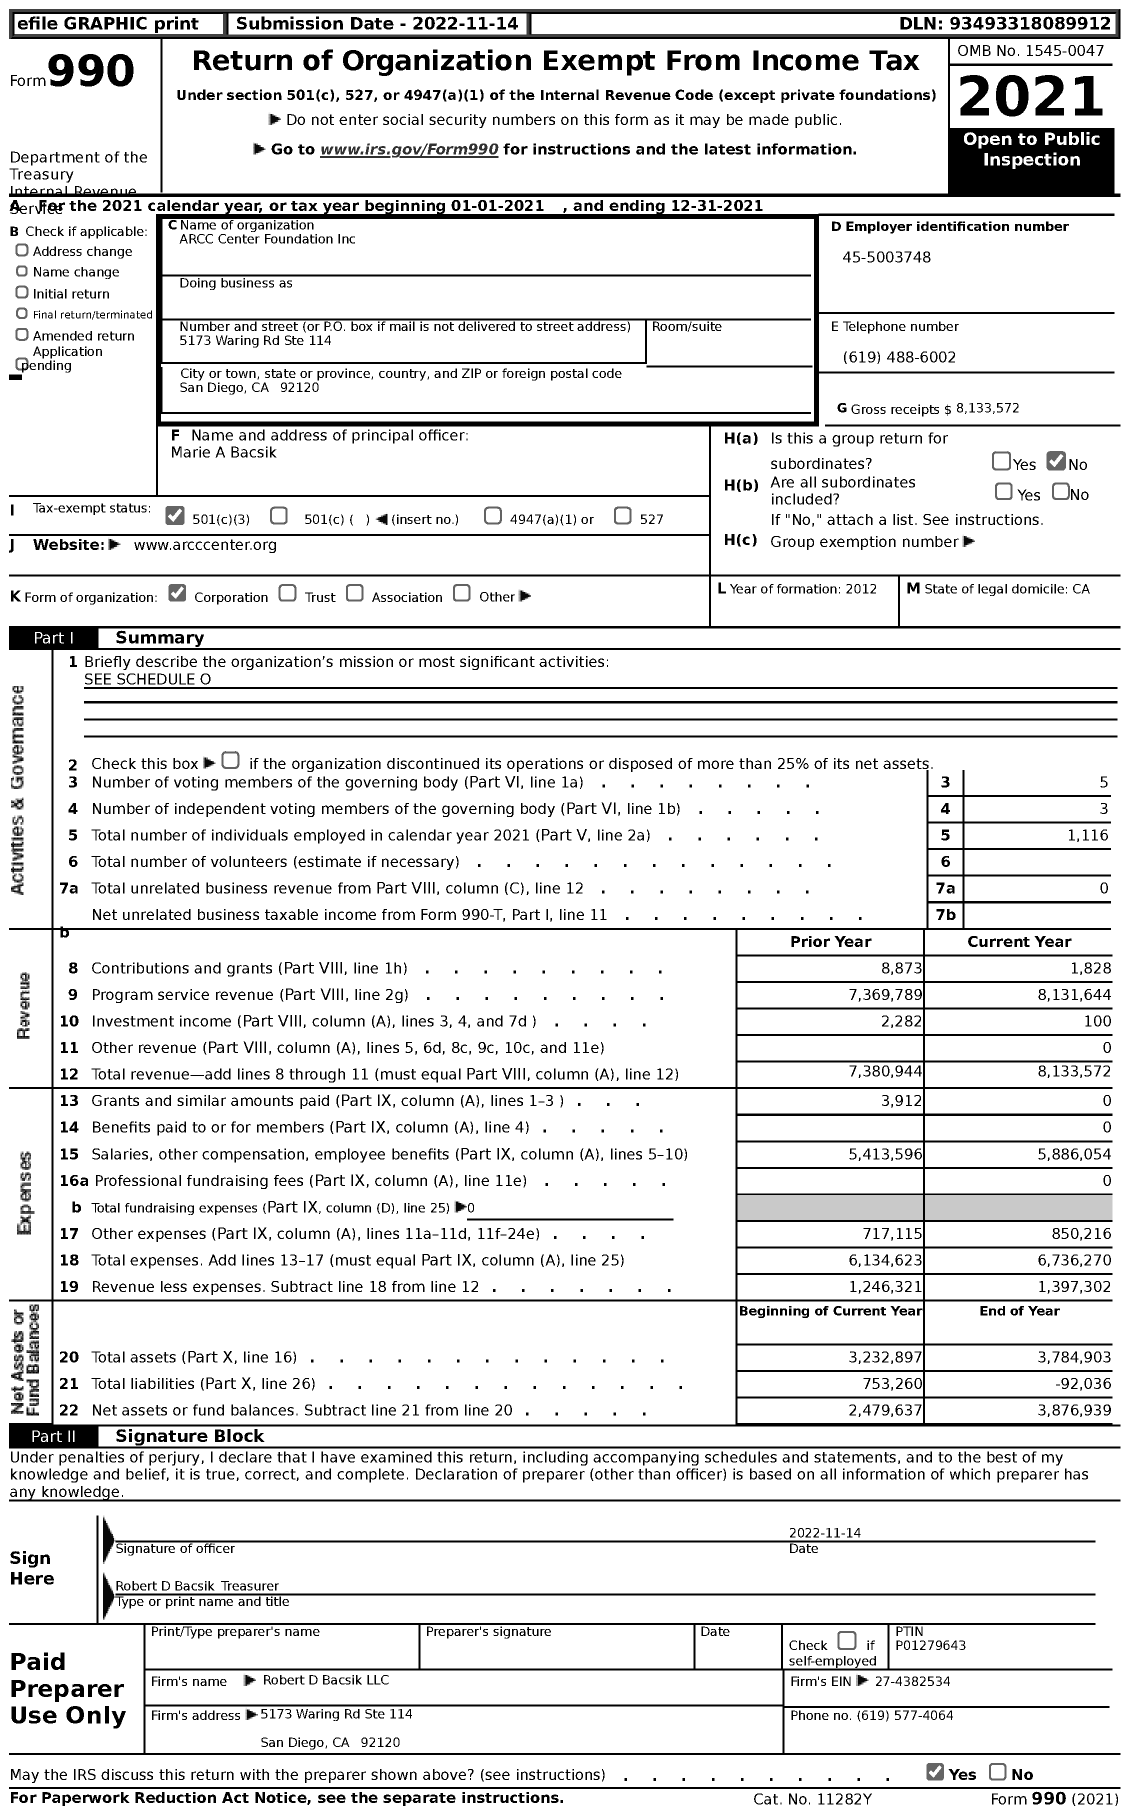 Image of first page of 2021 Form 990 for ARCC Center Foundation